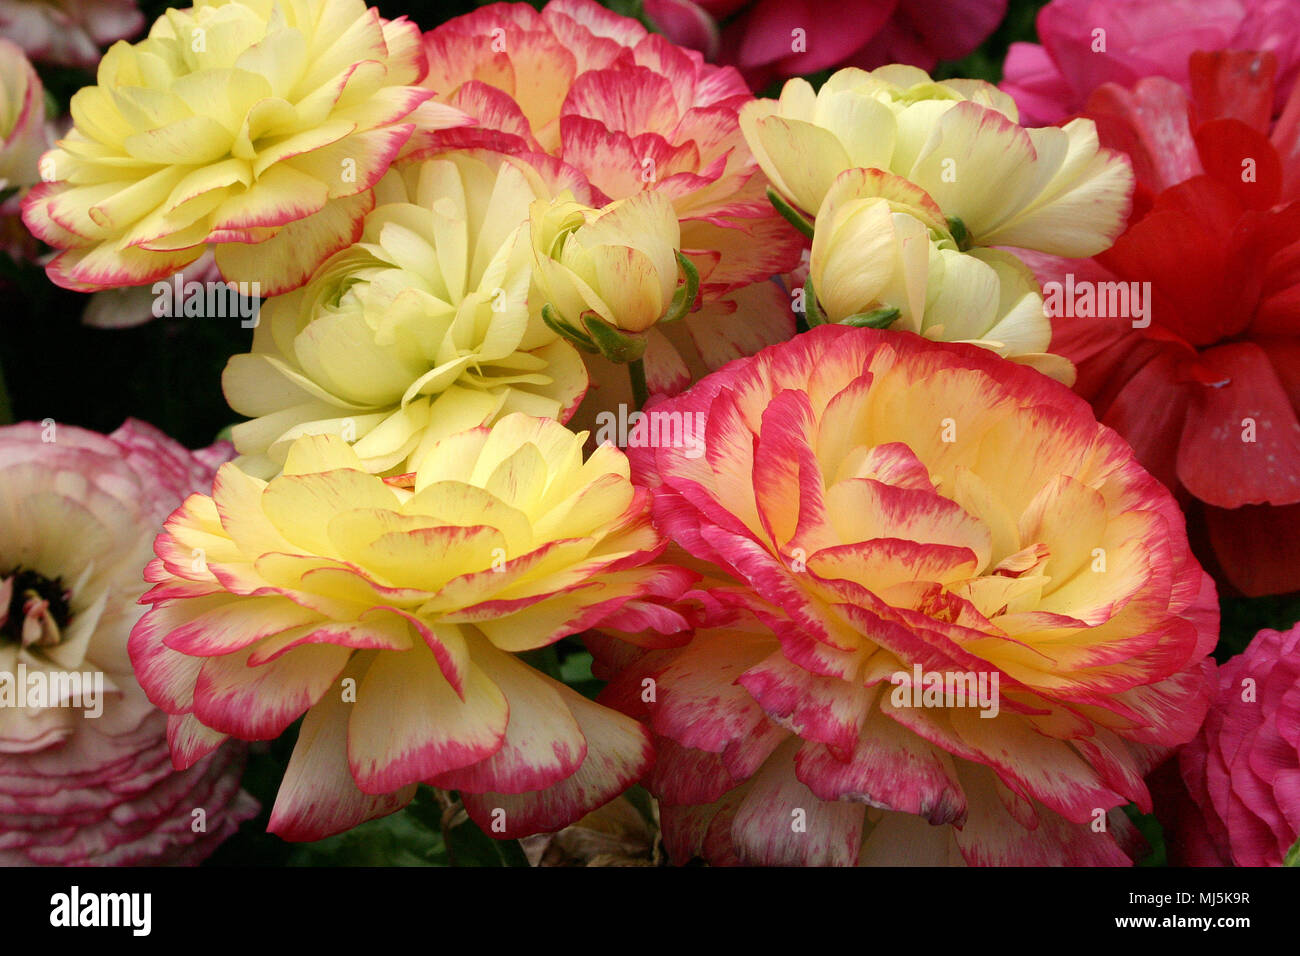 CLOSE-UP OF PINK EDGED RANUNCULUS FLOWERS Stock Photo